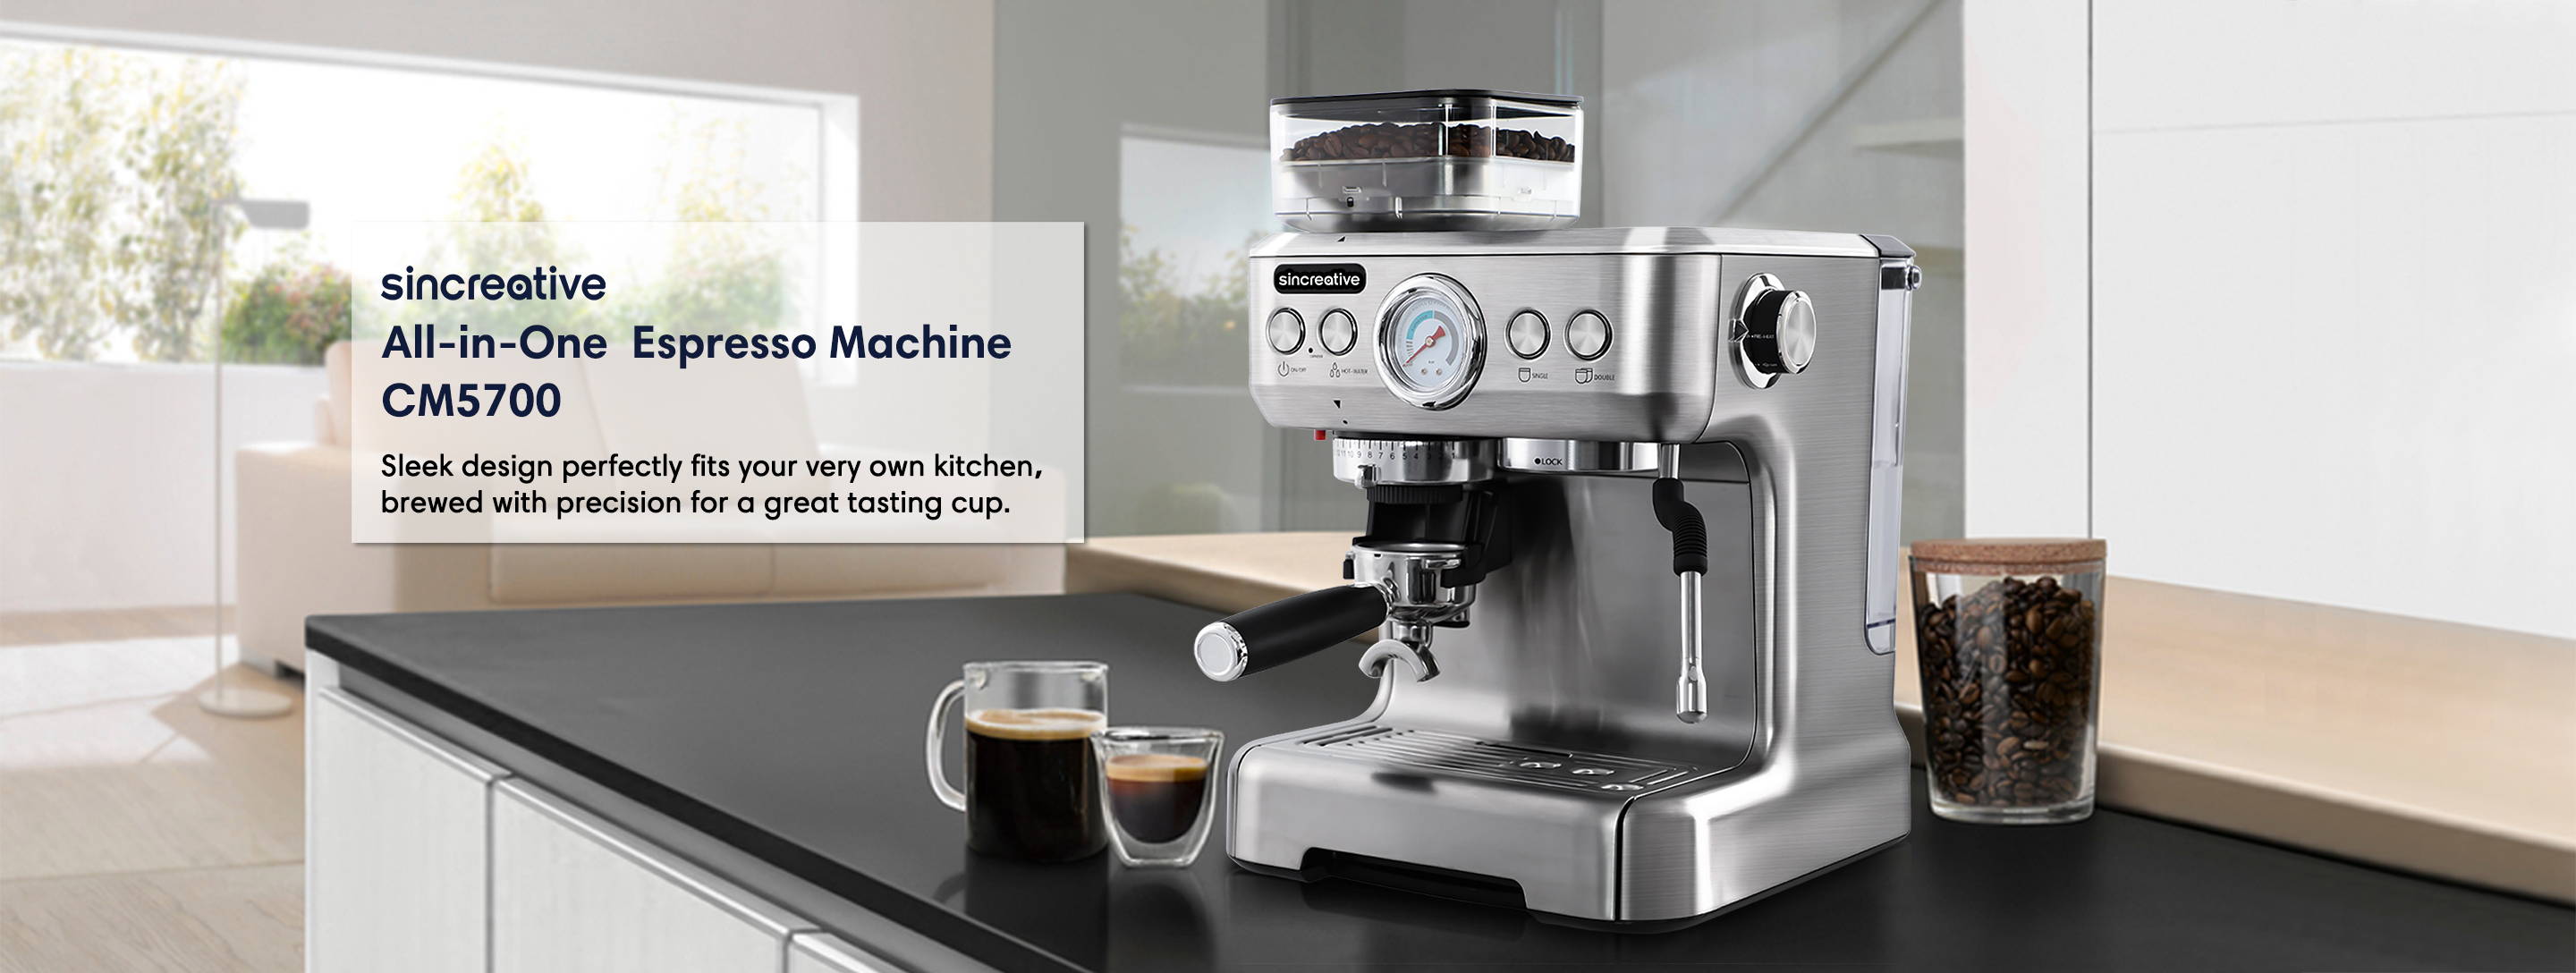 sincreative all-in-one semi-automatic espresso machine sleek design perfectly fits your very own kitchen, brewed with precision for a great tasting cup.